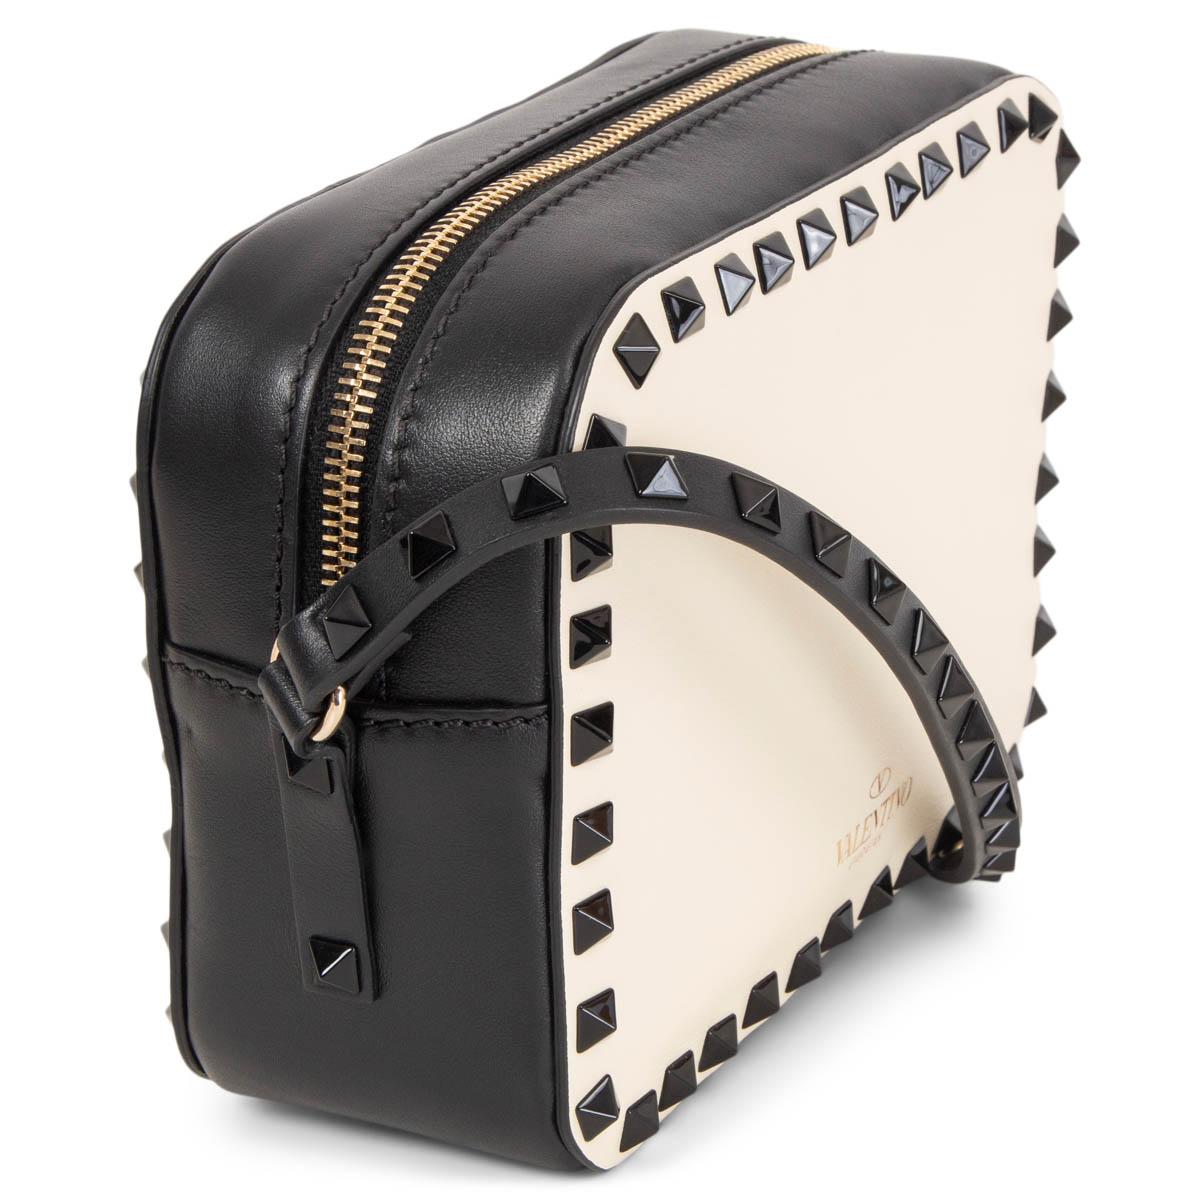 100% authentic Valentino Rockstud Camera Bag in black and cream smooth leather embellished with black classic pyramid studs. Opens with a zipper on top and is lined in black leather with one open pocket agaist the back. Brand new. Comes with dust